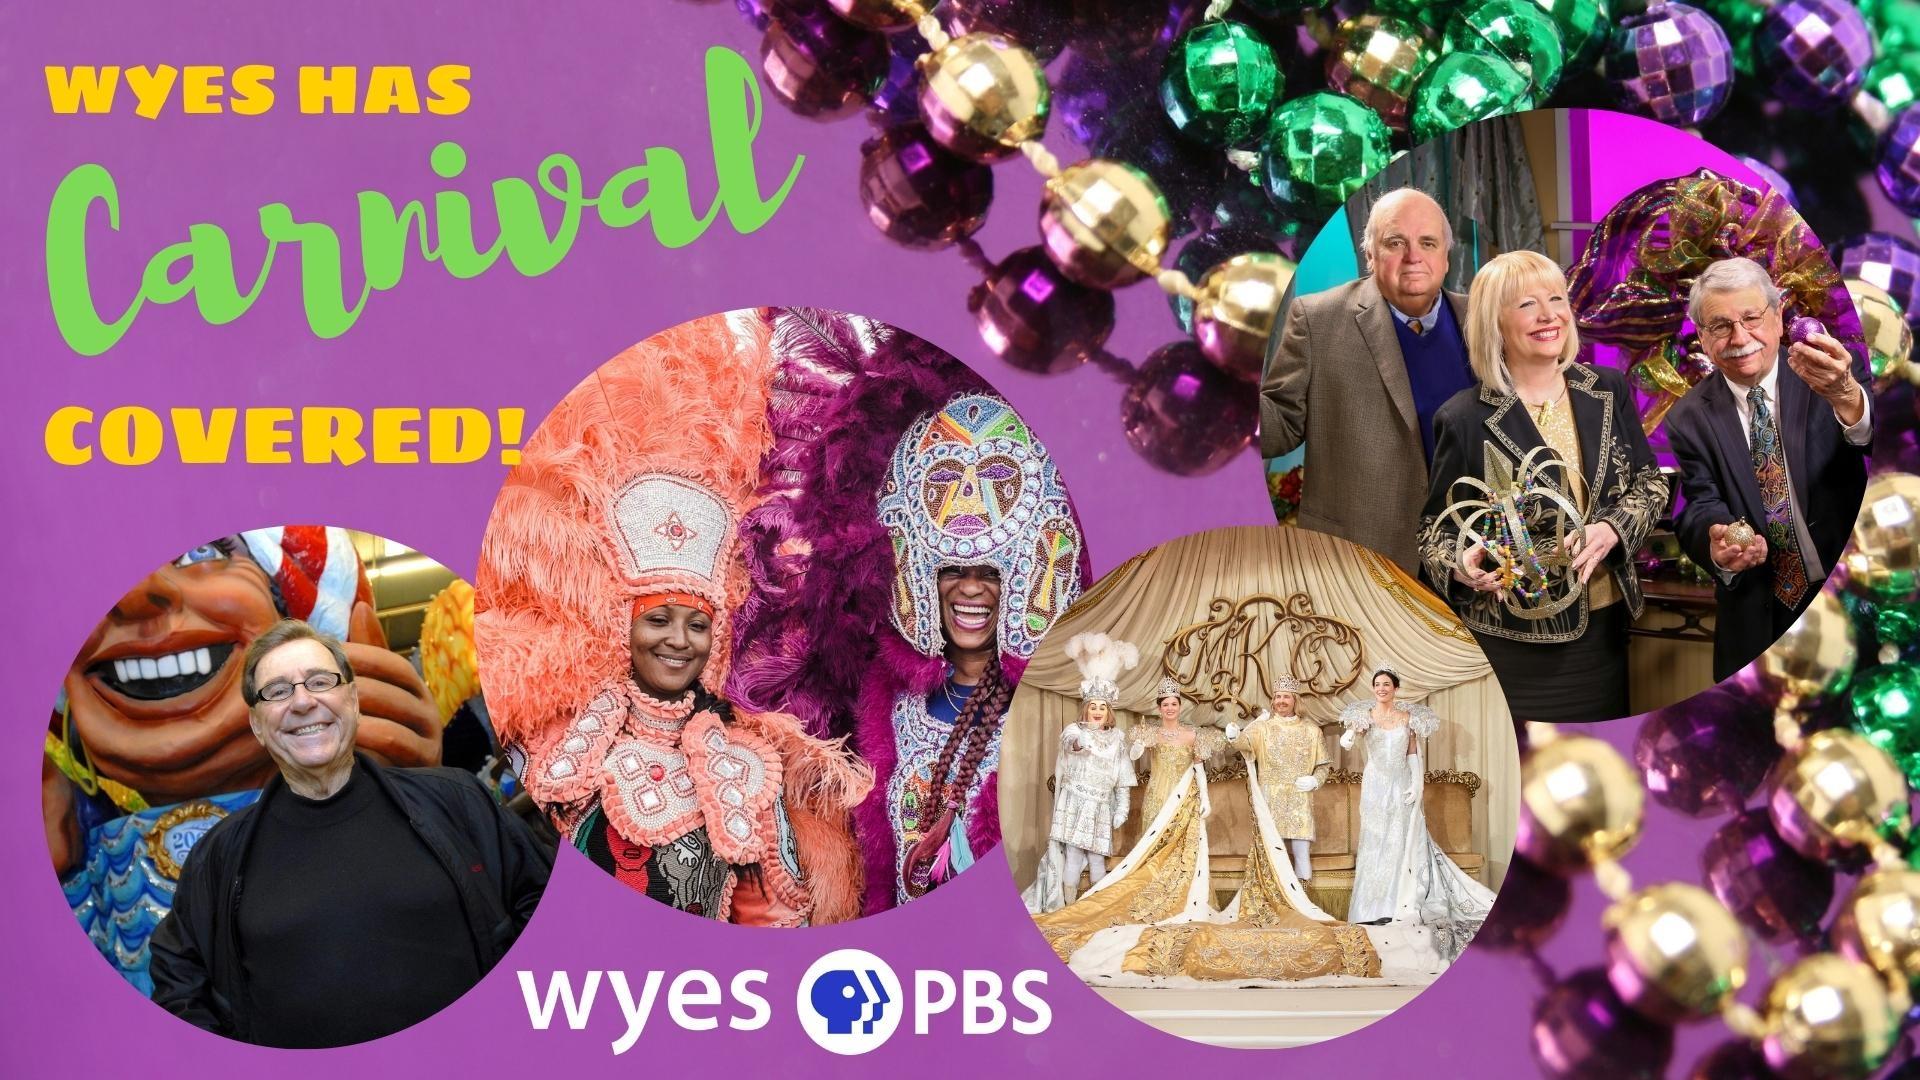 wyes has carnival covered